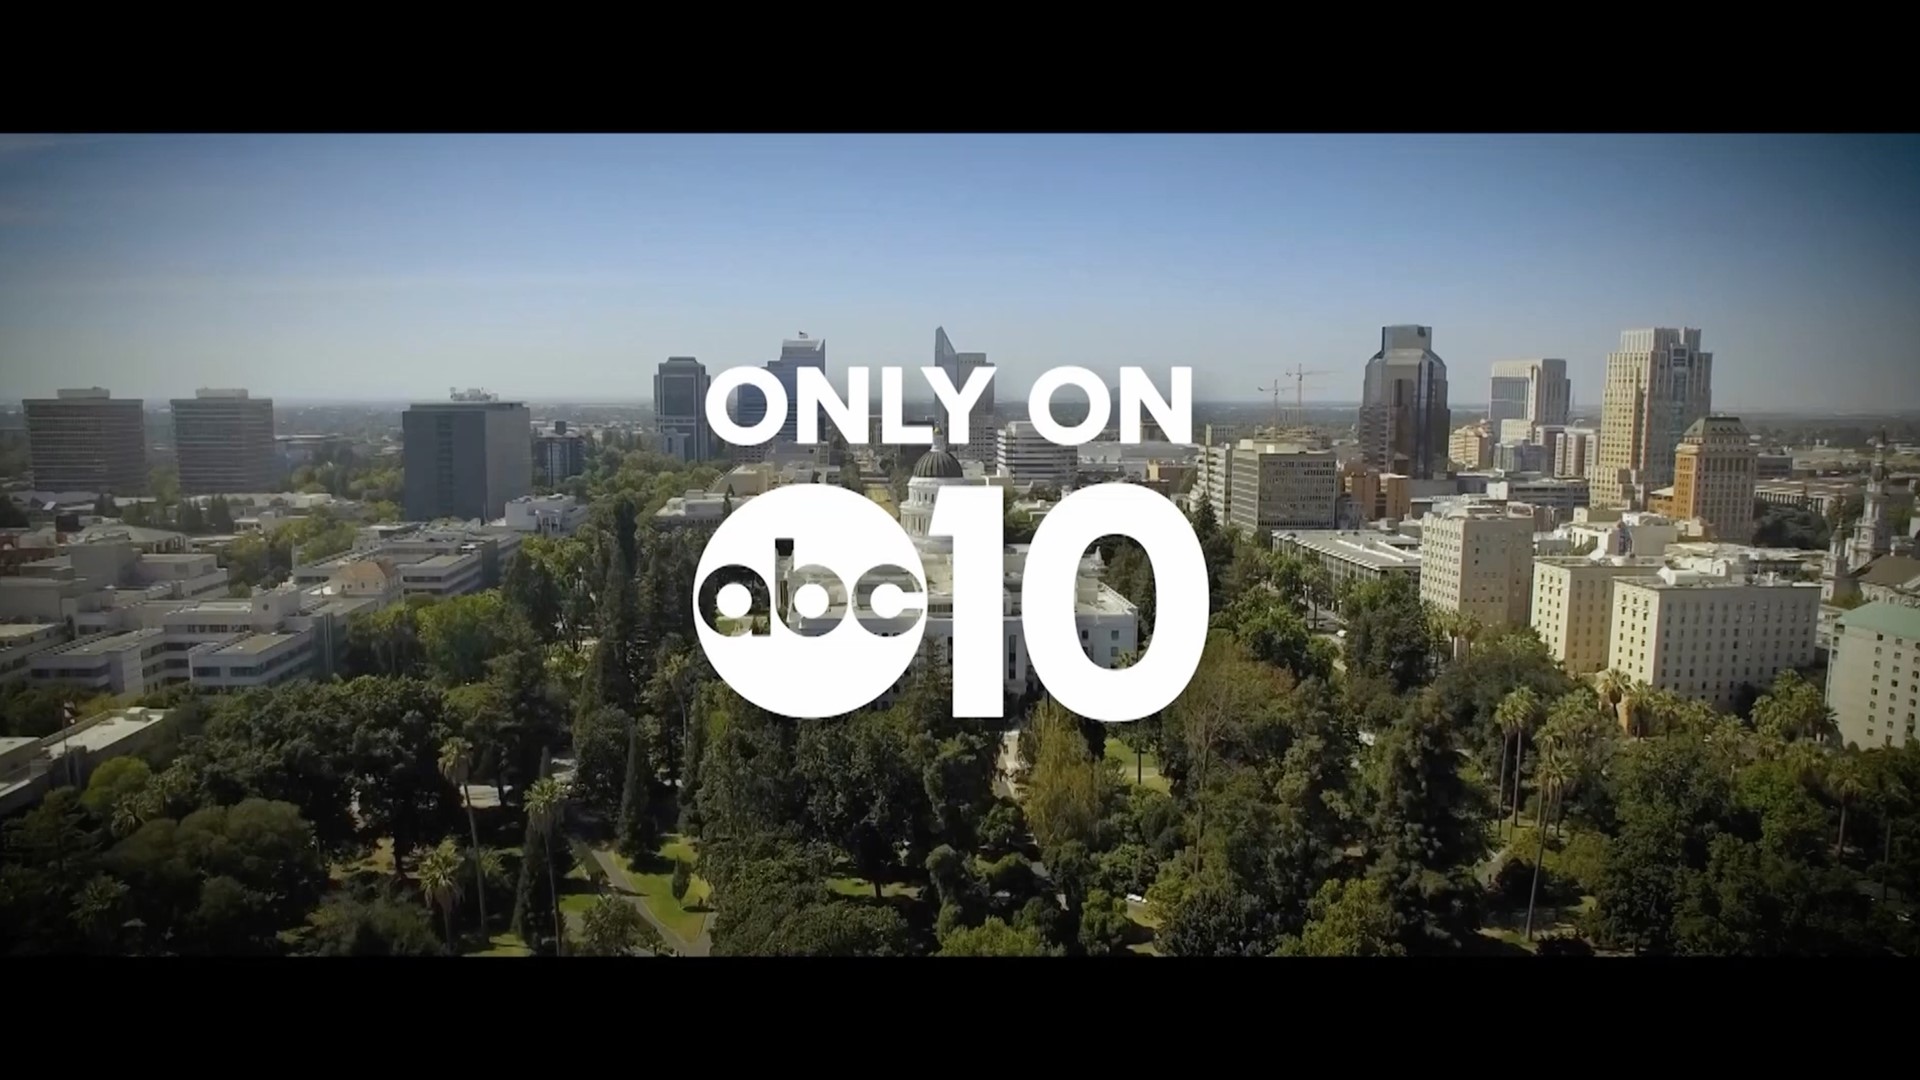 Watch ABC10 news weeknights from 6-7 for everything you need to know.